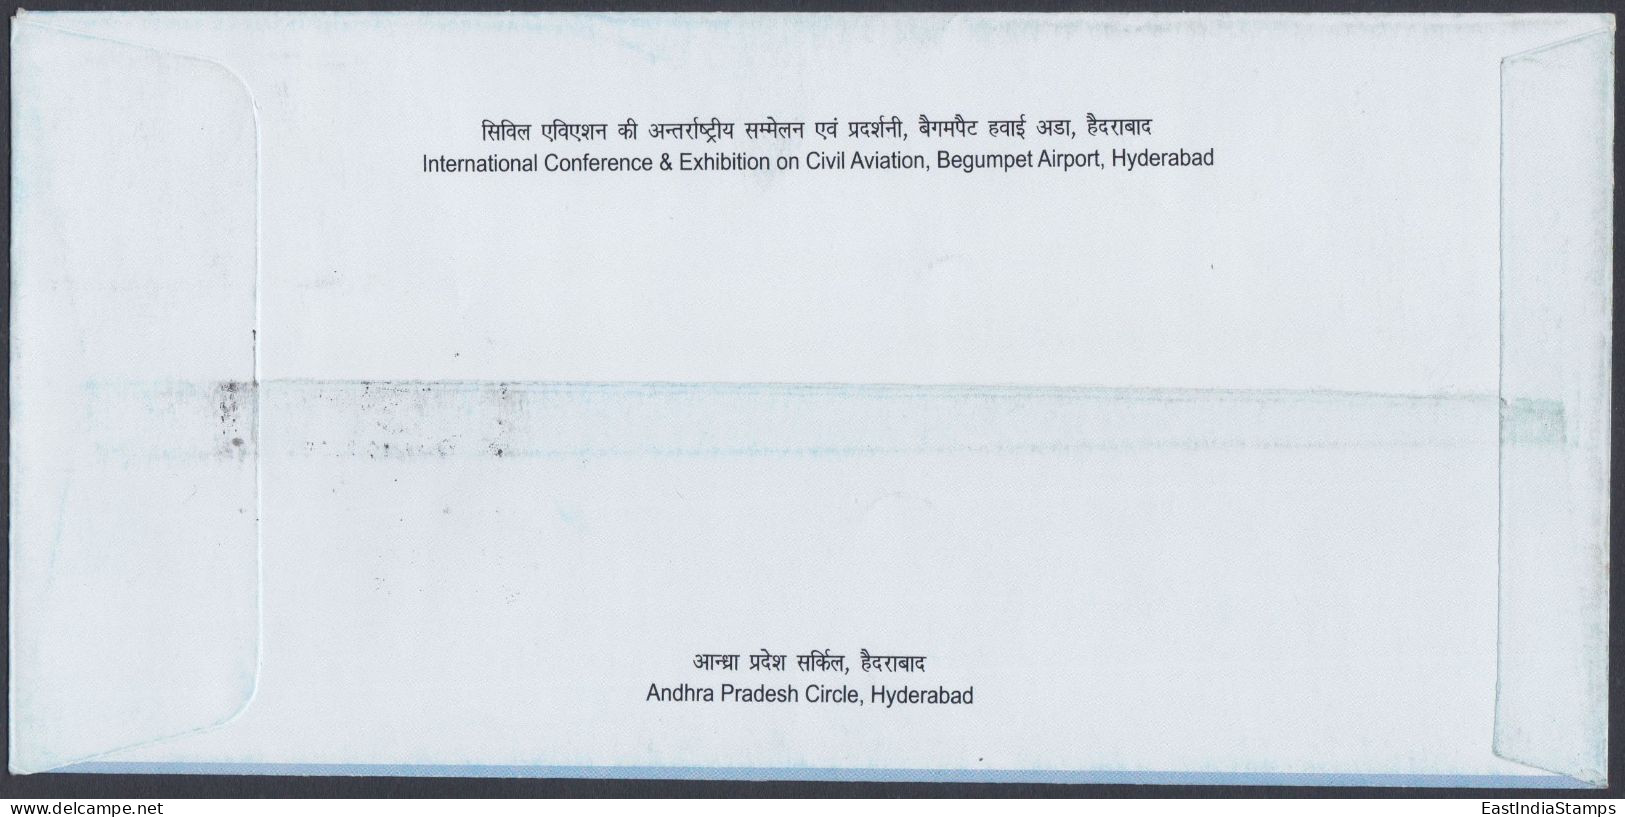 Inde India 2008 Special Cover Aviation, Aeroplane, Aircraft, Airplane, Jet, Airport, Pictorial Postmark - Lettres & Documents